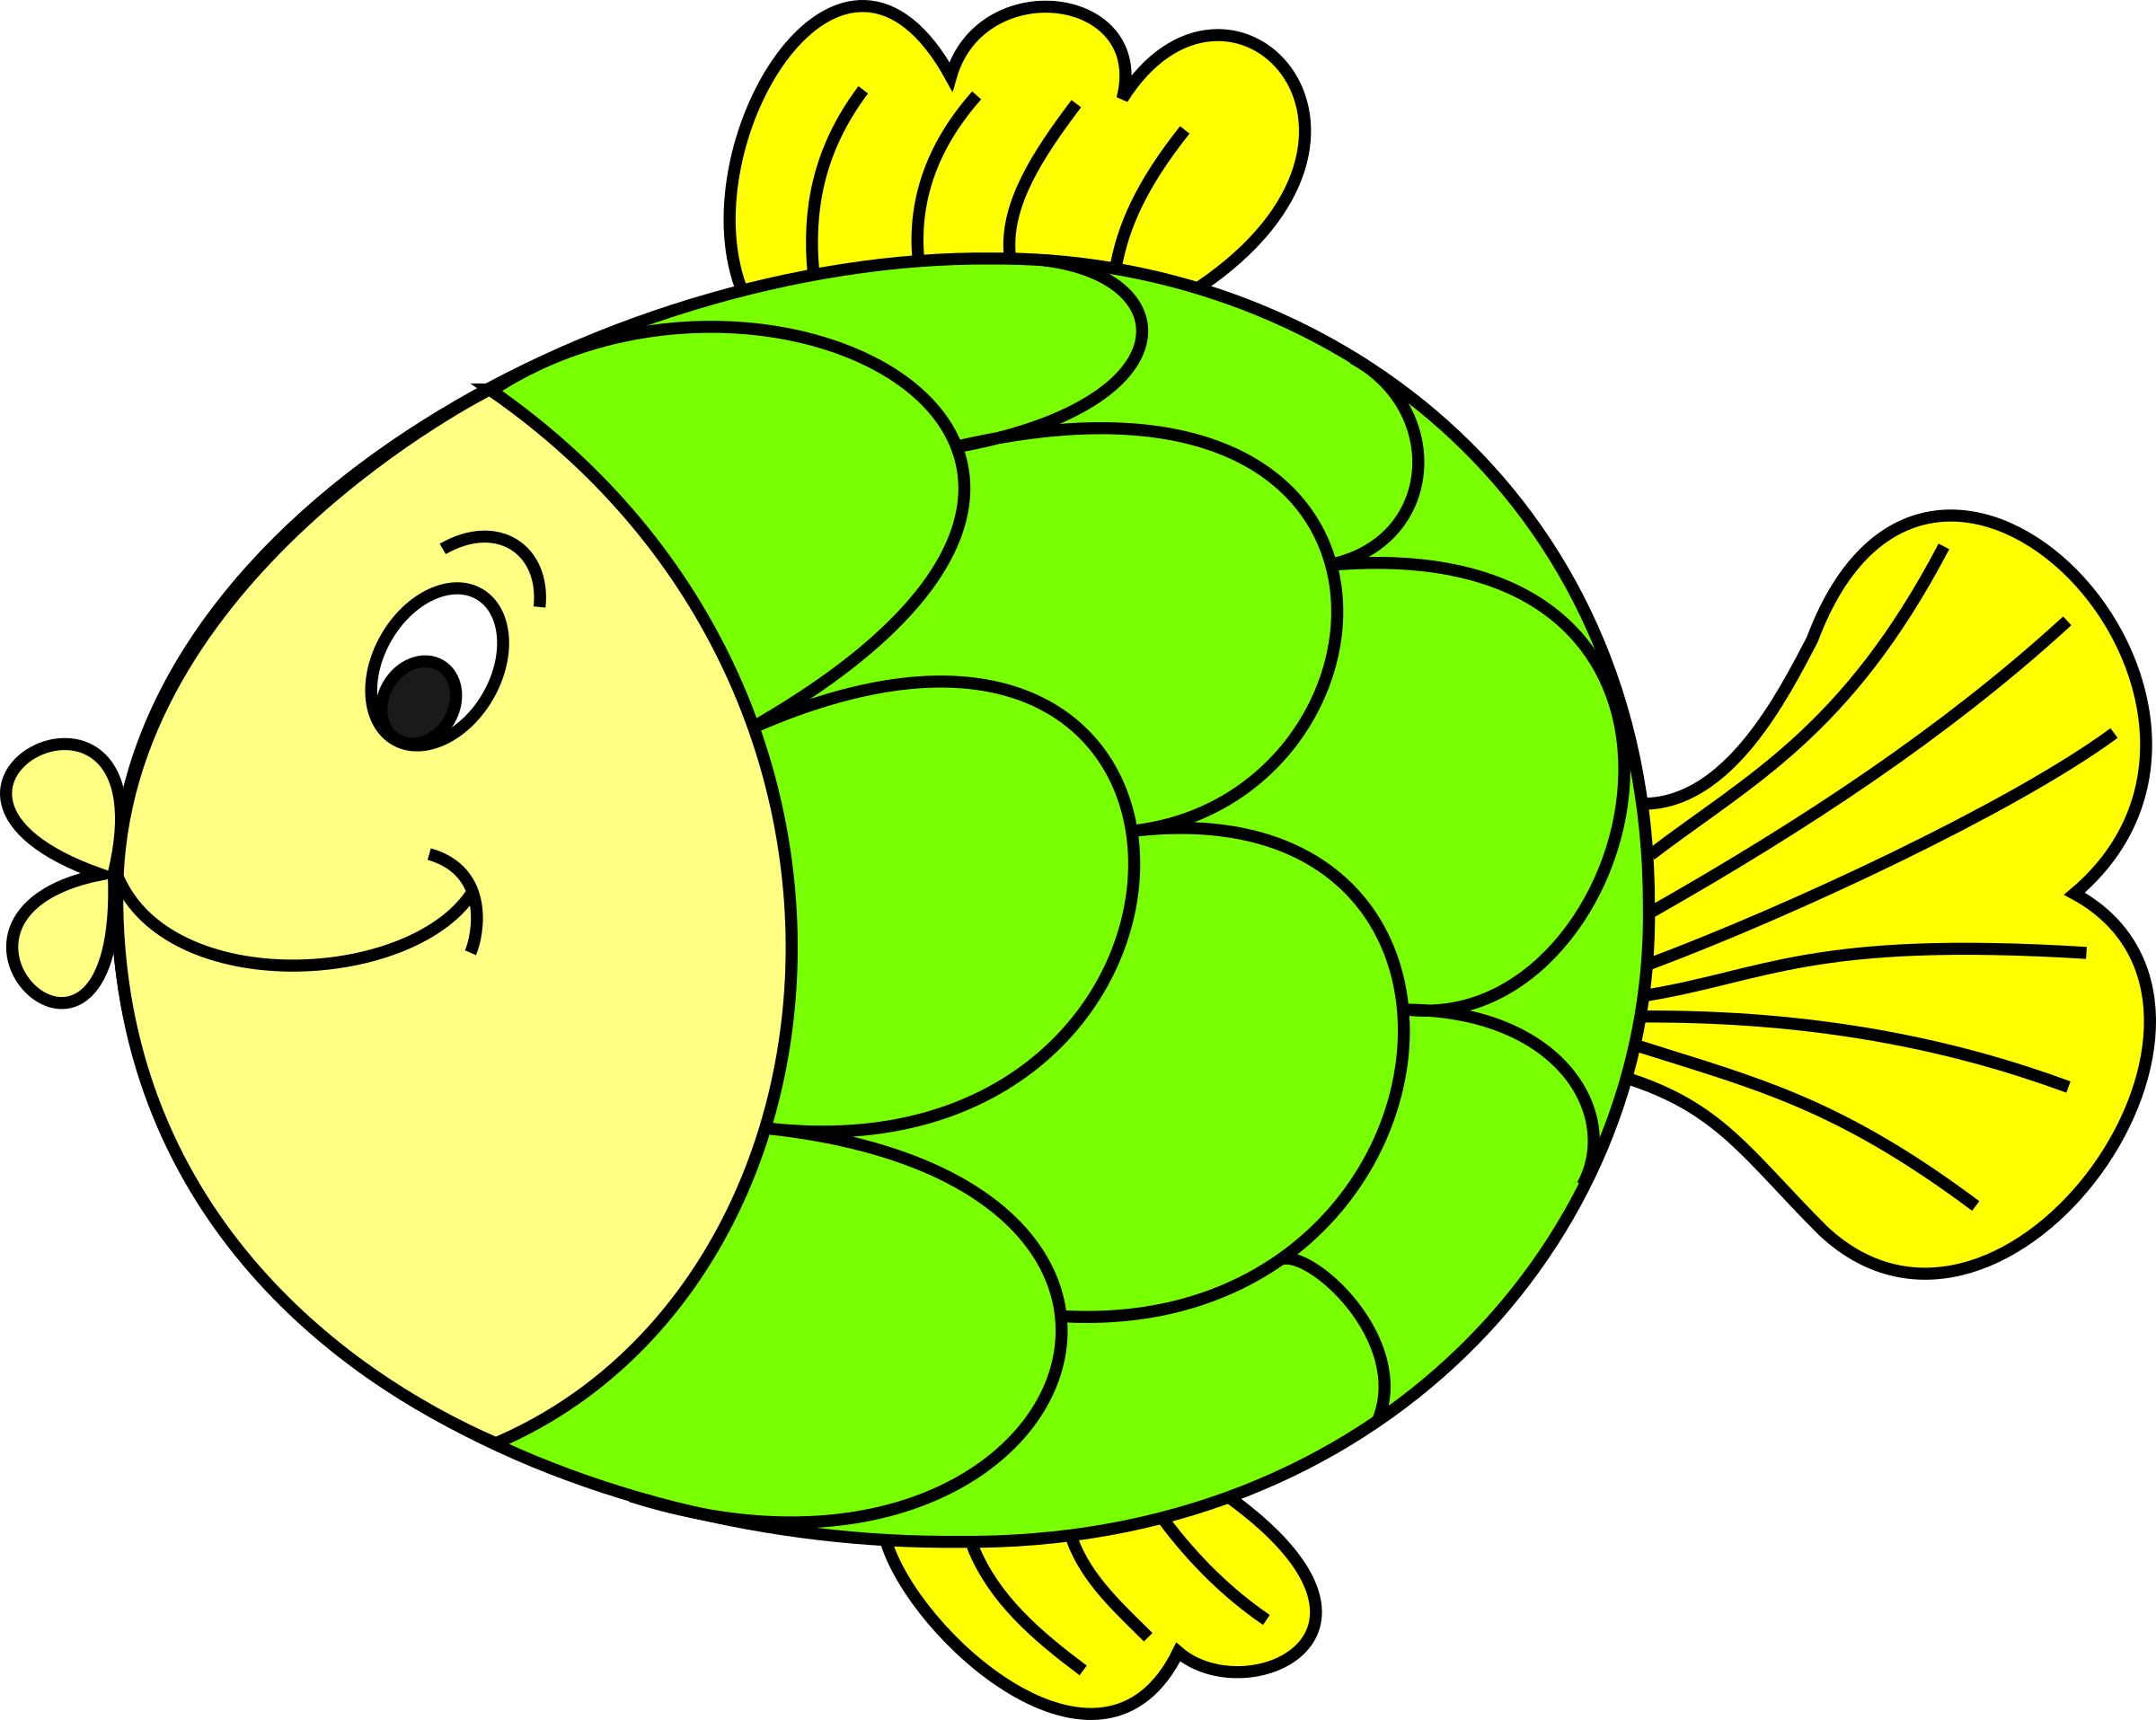 Colour Picture And Fish - ClipArt Best